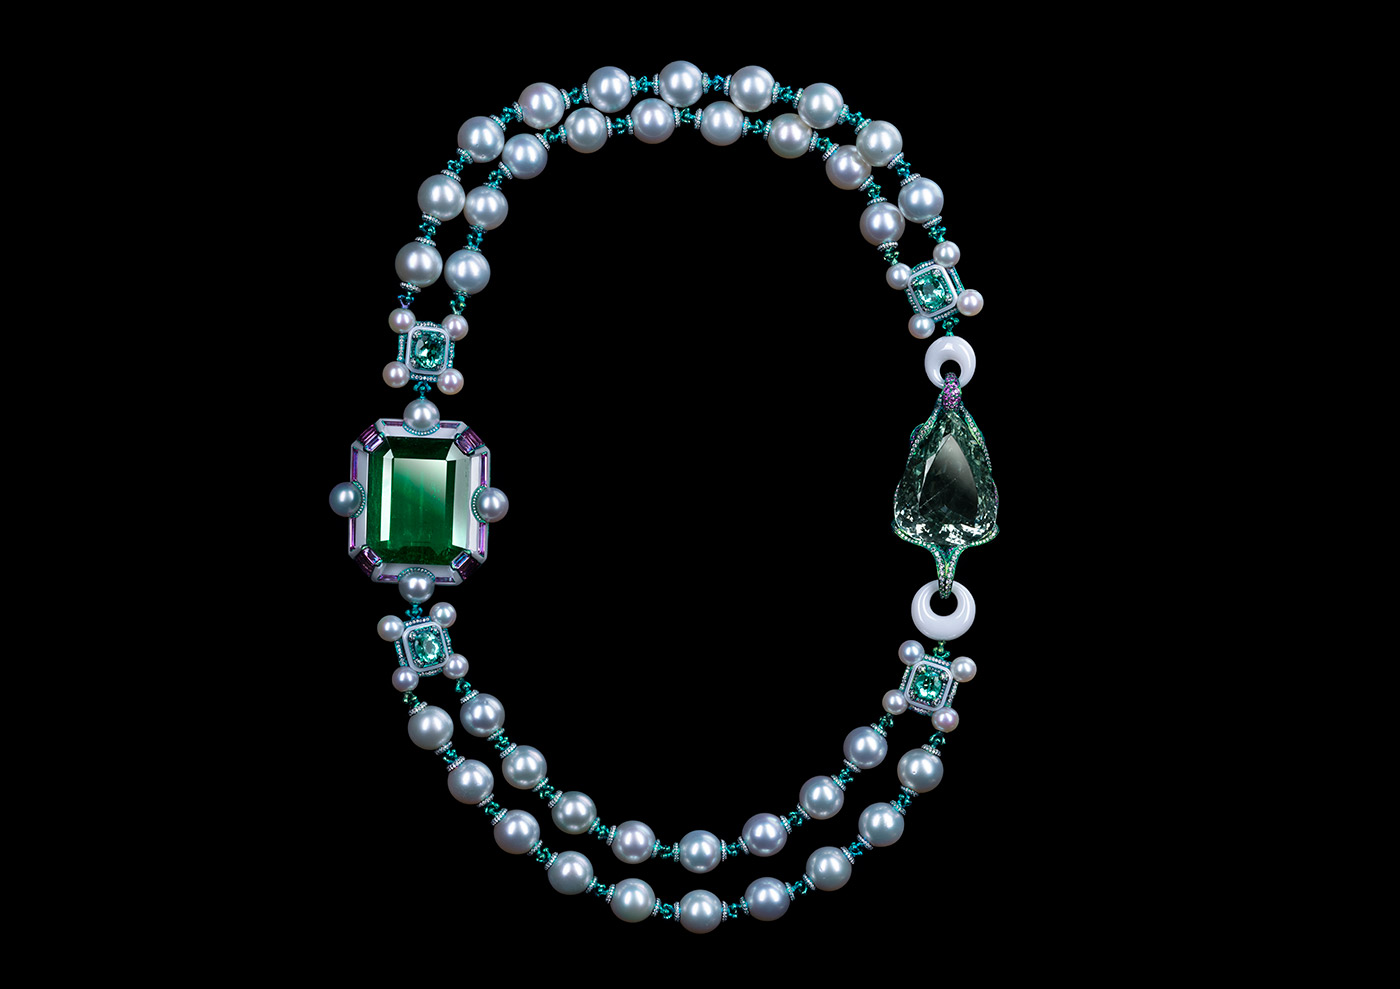 Wallace Chan ‘Dream Within a Dream’ transformable necklace with 96.71ct emerald, 74.35ct pear-shaped aquamarine, South Sea pearl, rubellite, emerald, pink sapphire, green tourmaline, amethyst and diamond, in titanium and Wallace Chan Porcelain